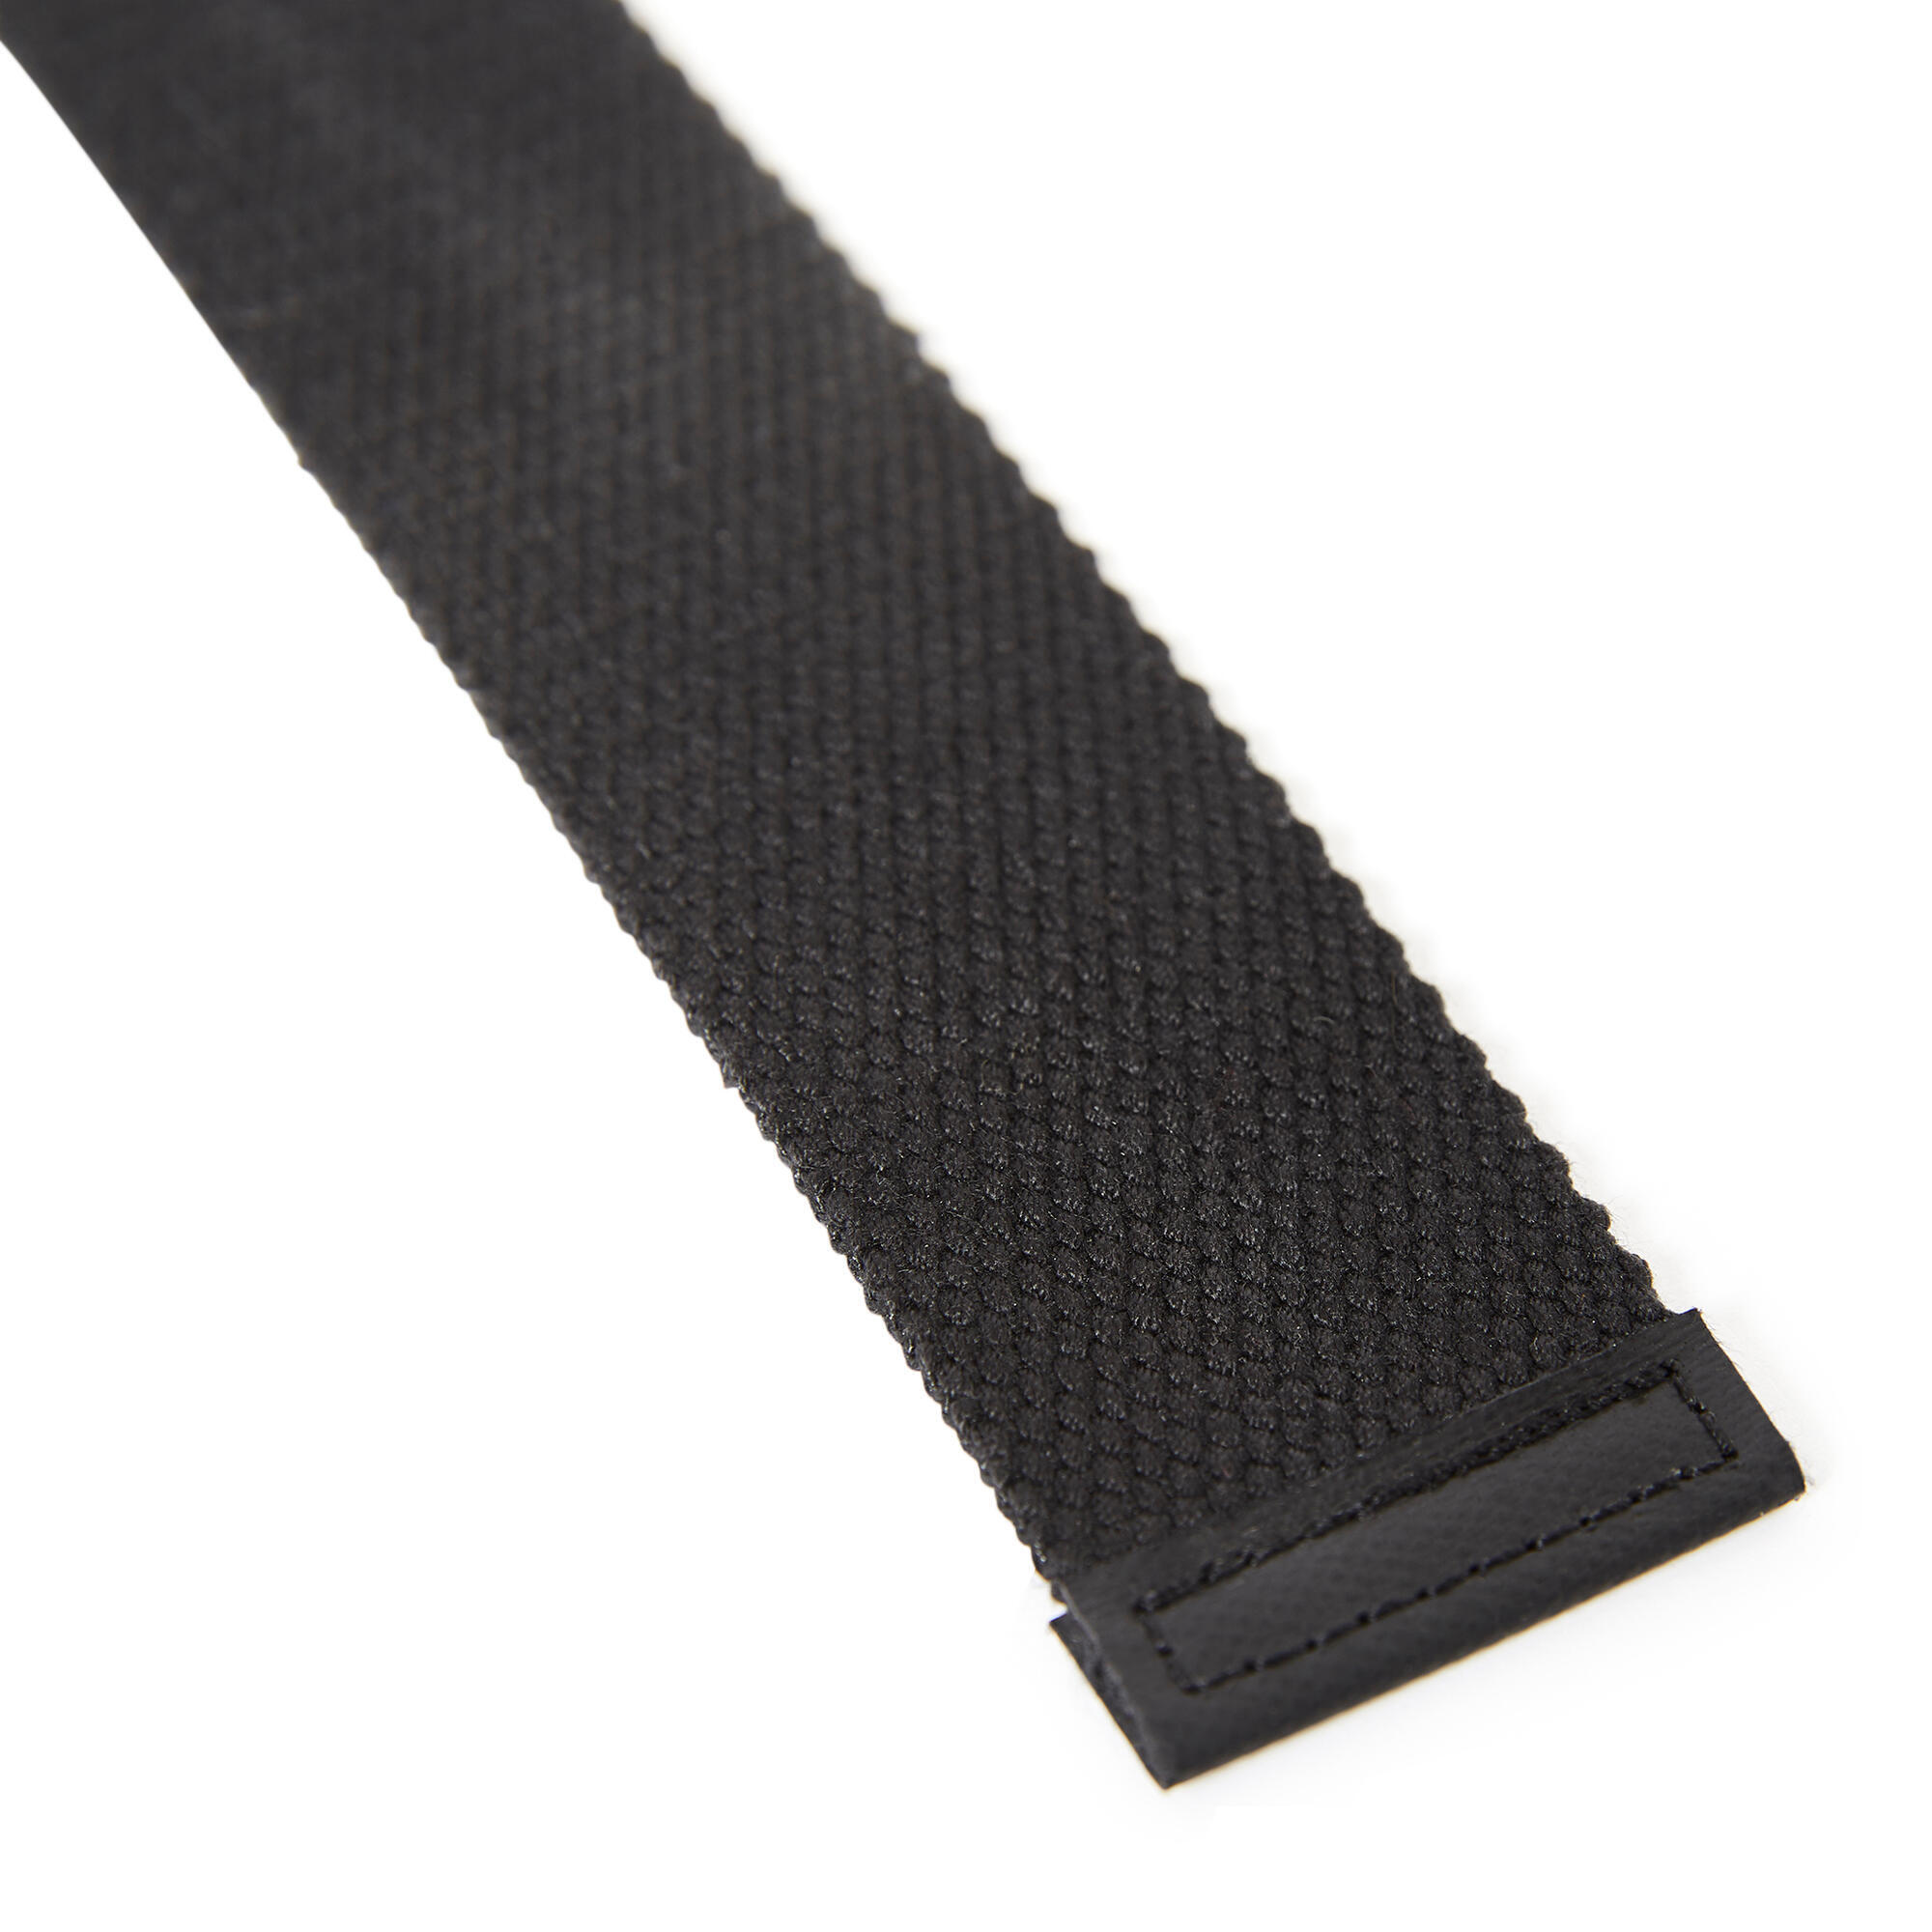 Weight Training Lifting Strap With Wrist Support - Black 4/4